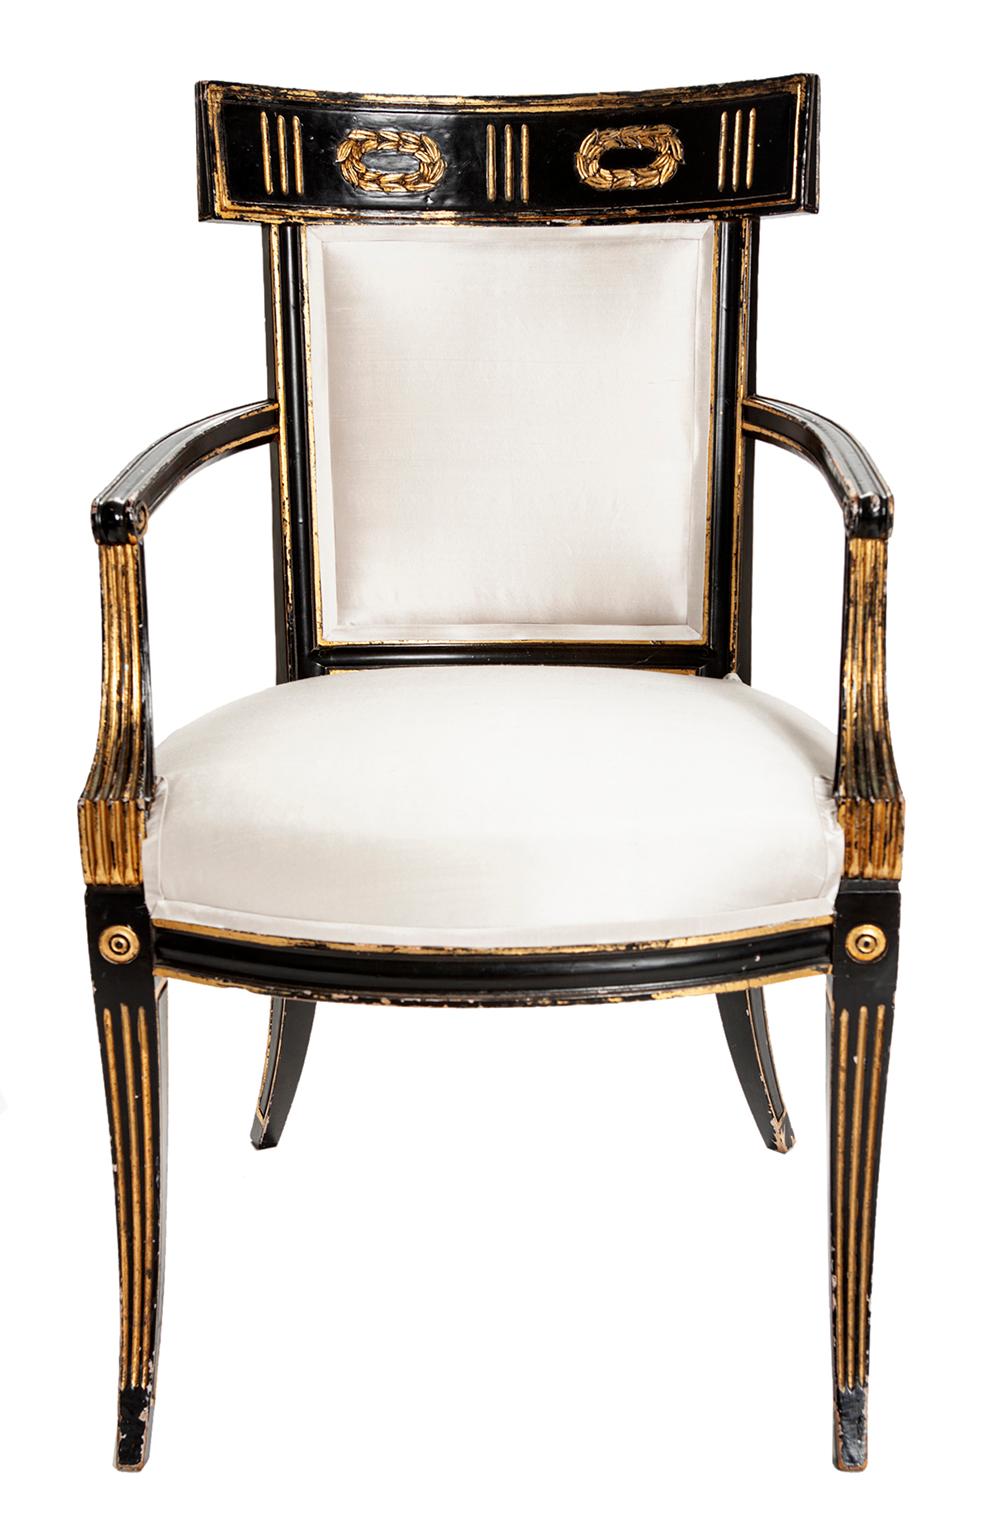 Hardwood Early 19th Century Hand Painted & Gilt Italian Regency Armchairs in Silk; a Pair For Sale